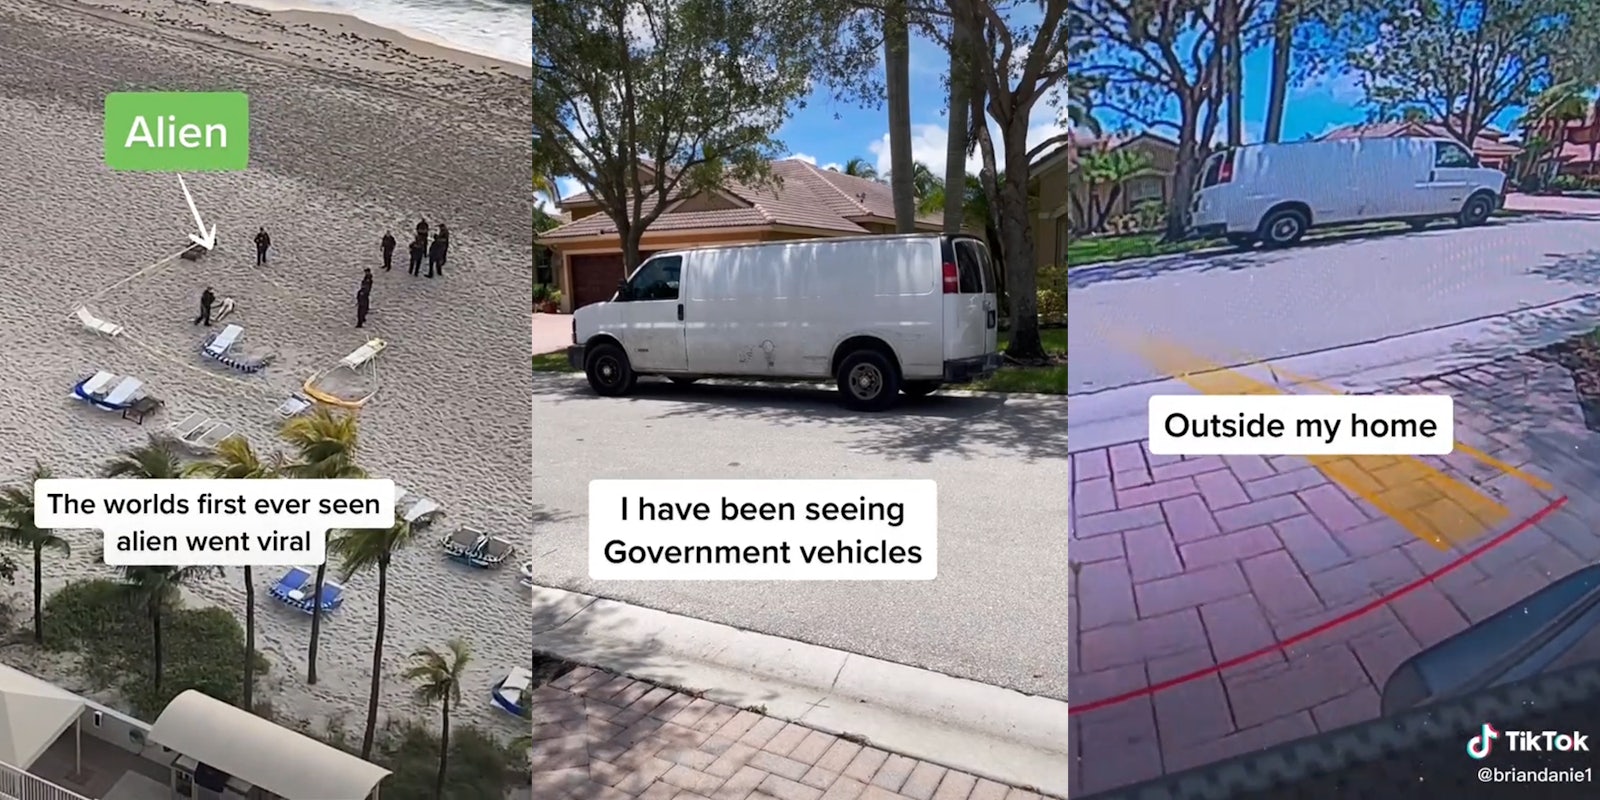 people on beach with 'Alien' caption and 'The worlds first ever seen alien went viral' (l) van parked in street with caption 'I have been seeing Government vehicles' (c) same van on street with caption 'outside my home' (r)